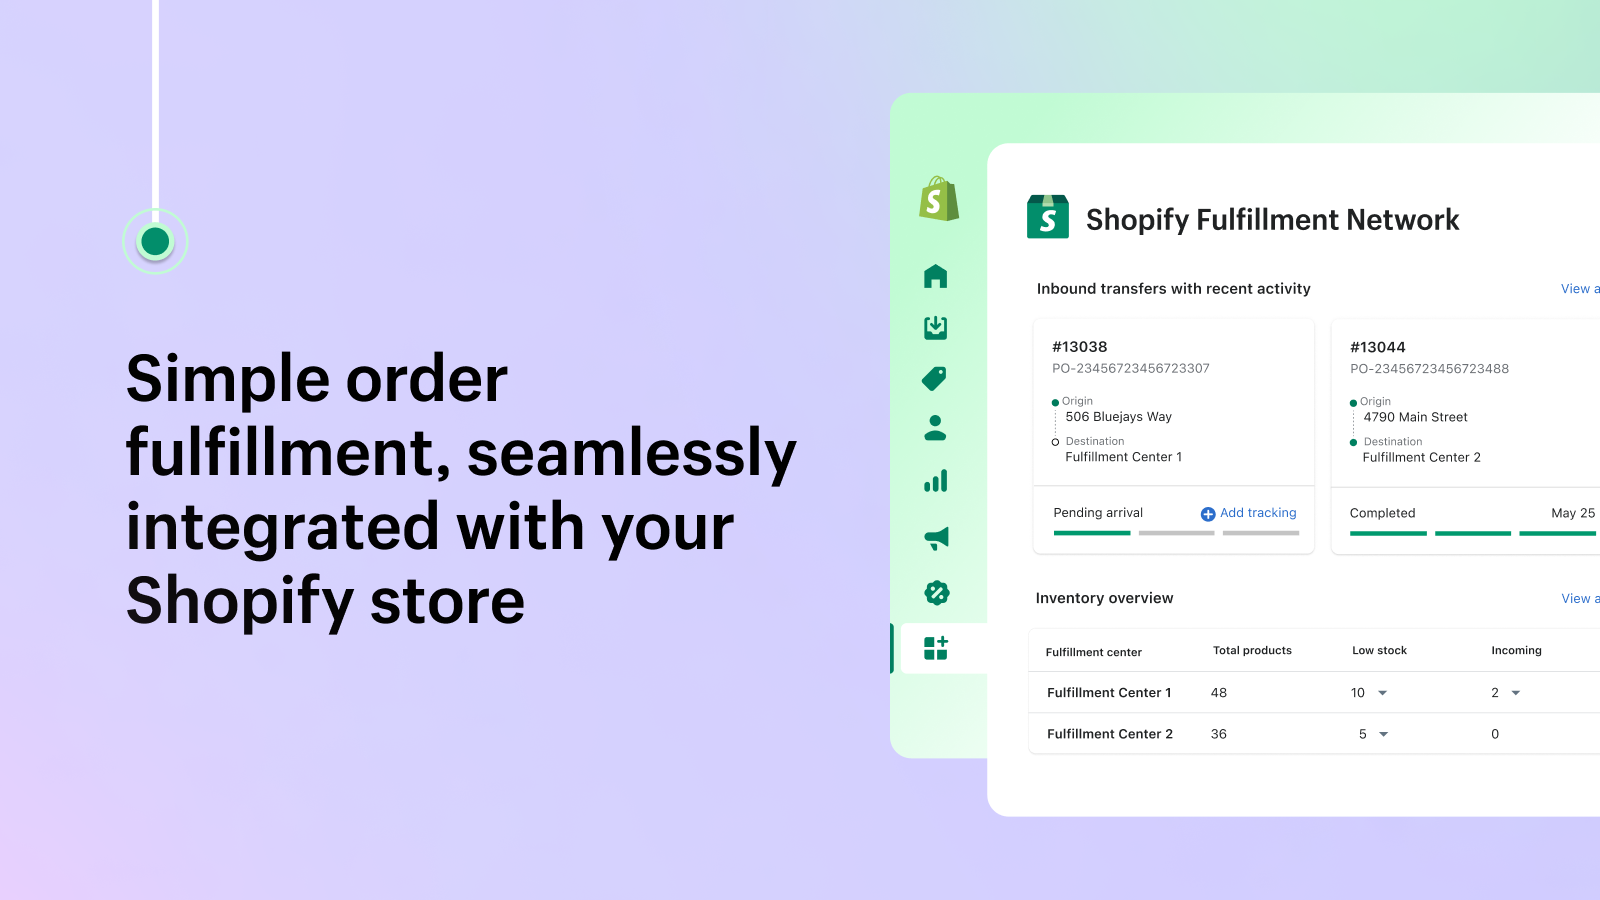 Simple order fulfillment integrated with your Shopify store